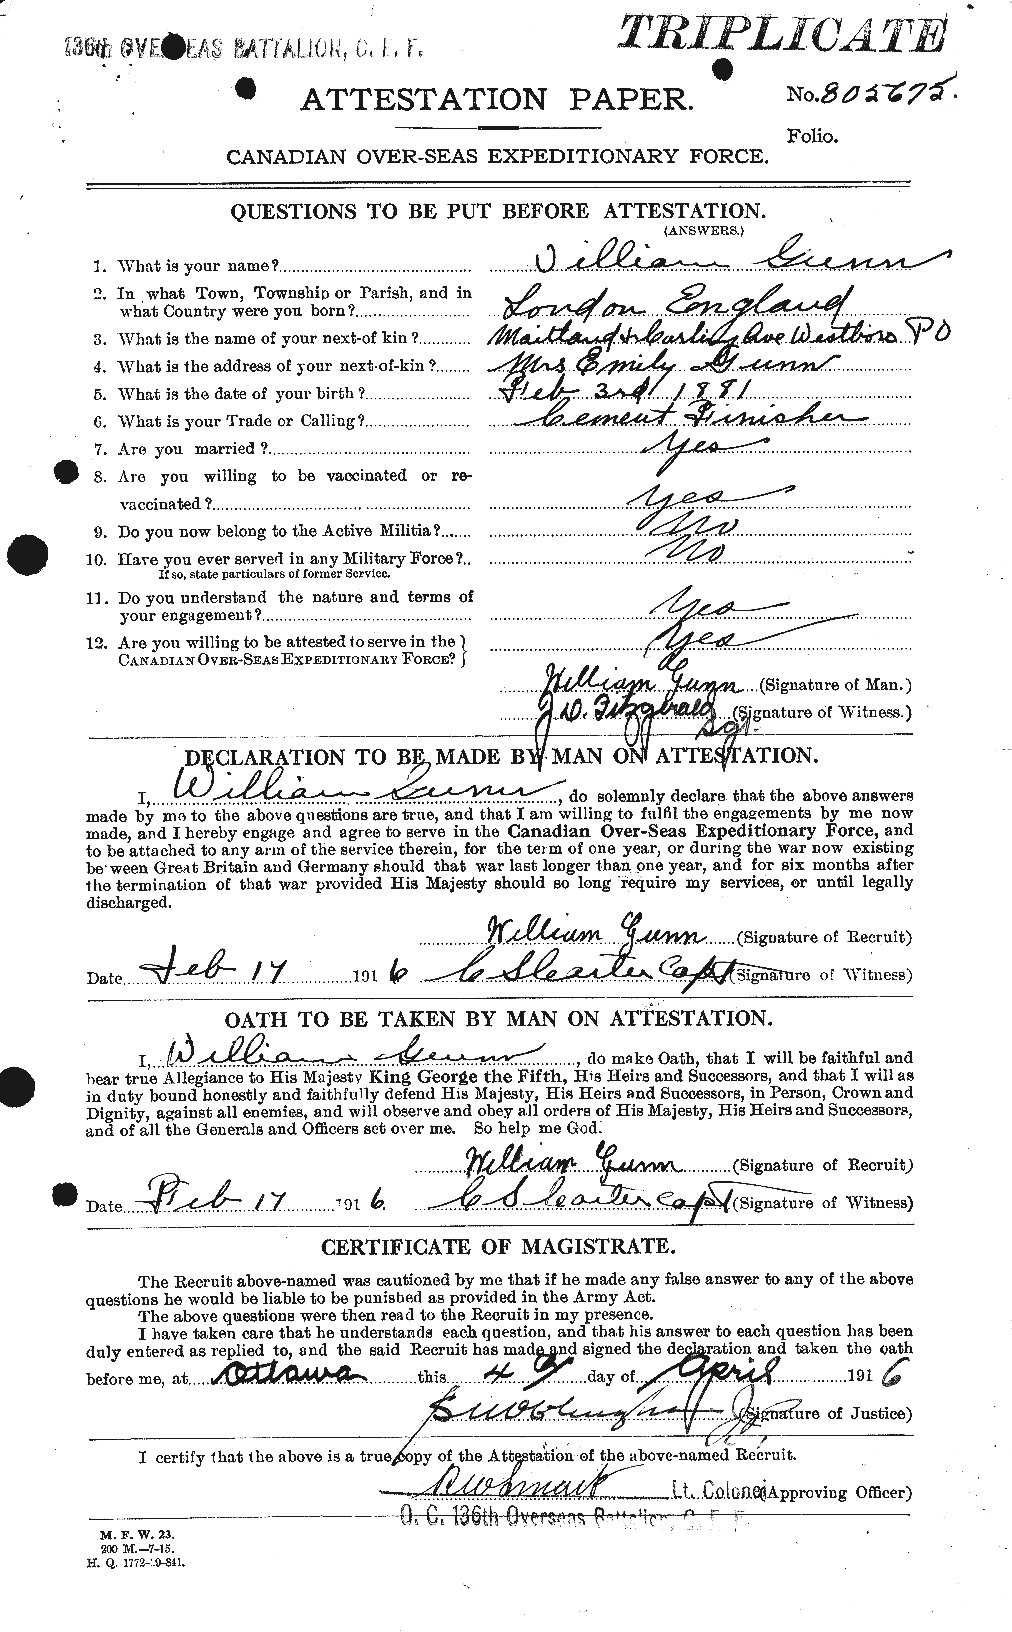 Personnel Records of the First World War - CEF 369353a